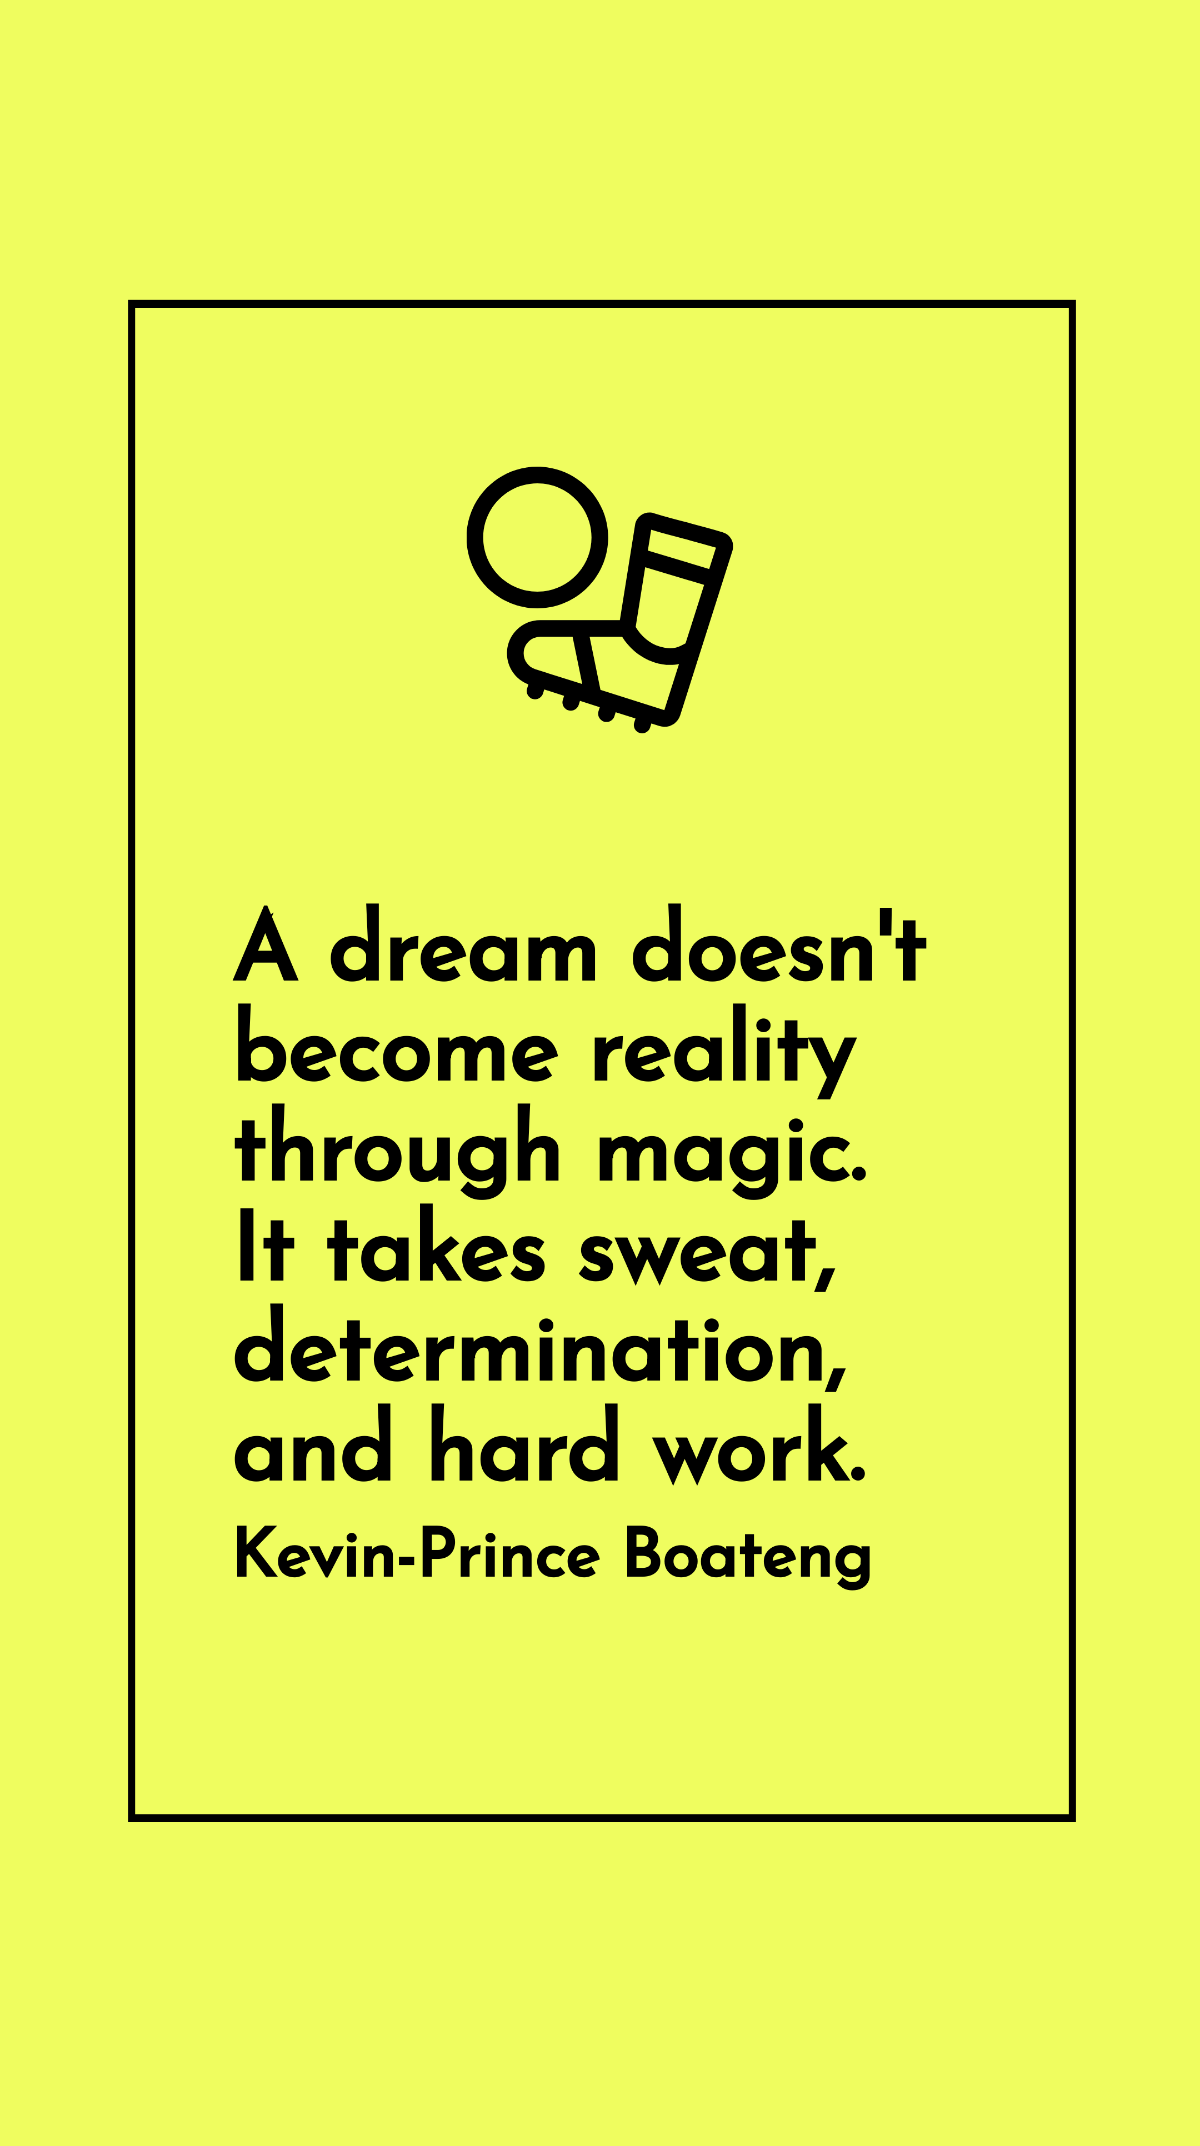 Free Kevin-Prince Boateng - A dream doesn't become reality through magic. It takes sweat, determination, and hard work. Template